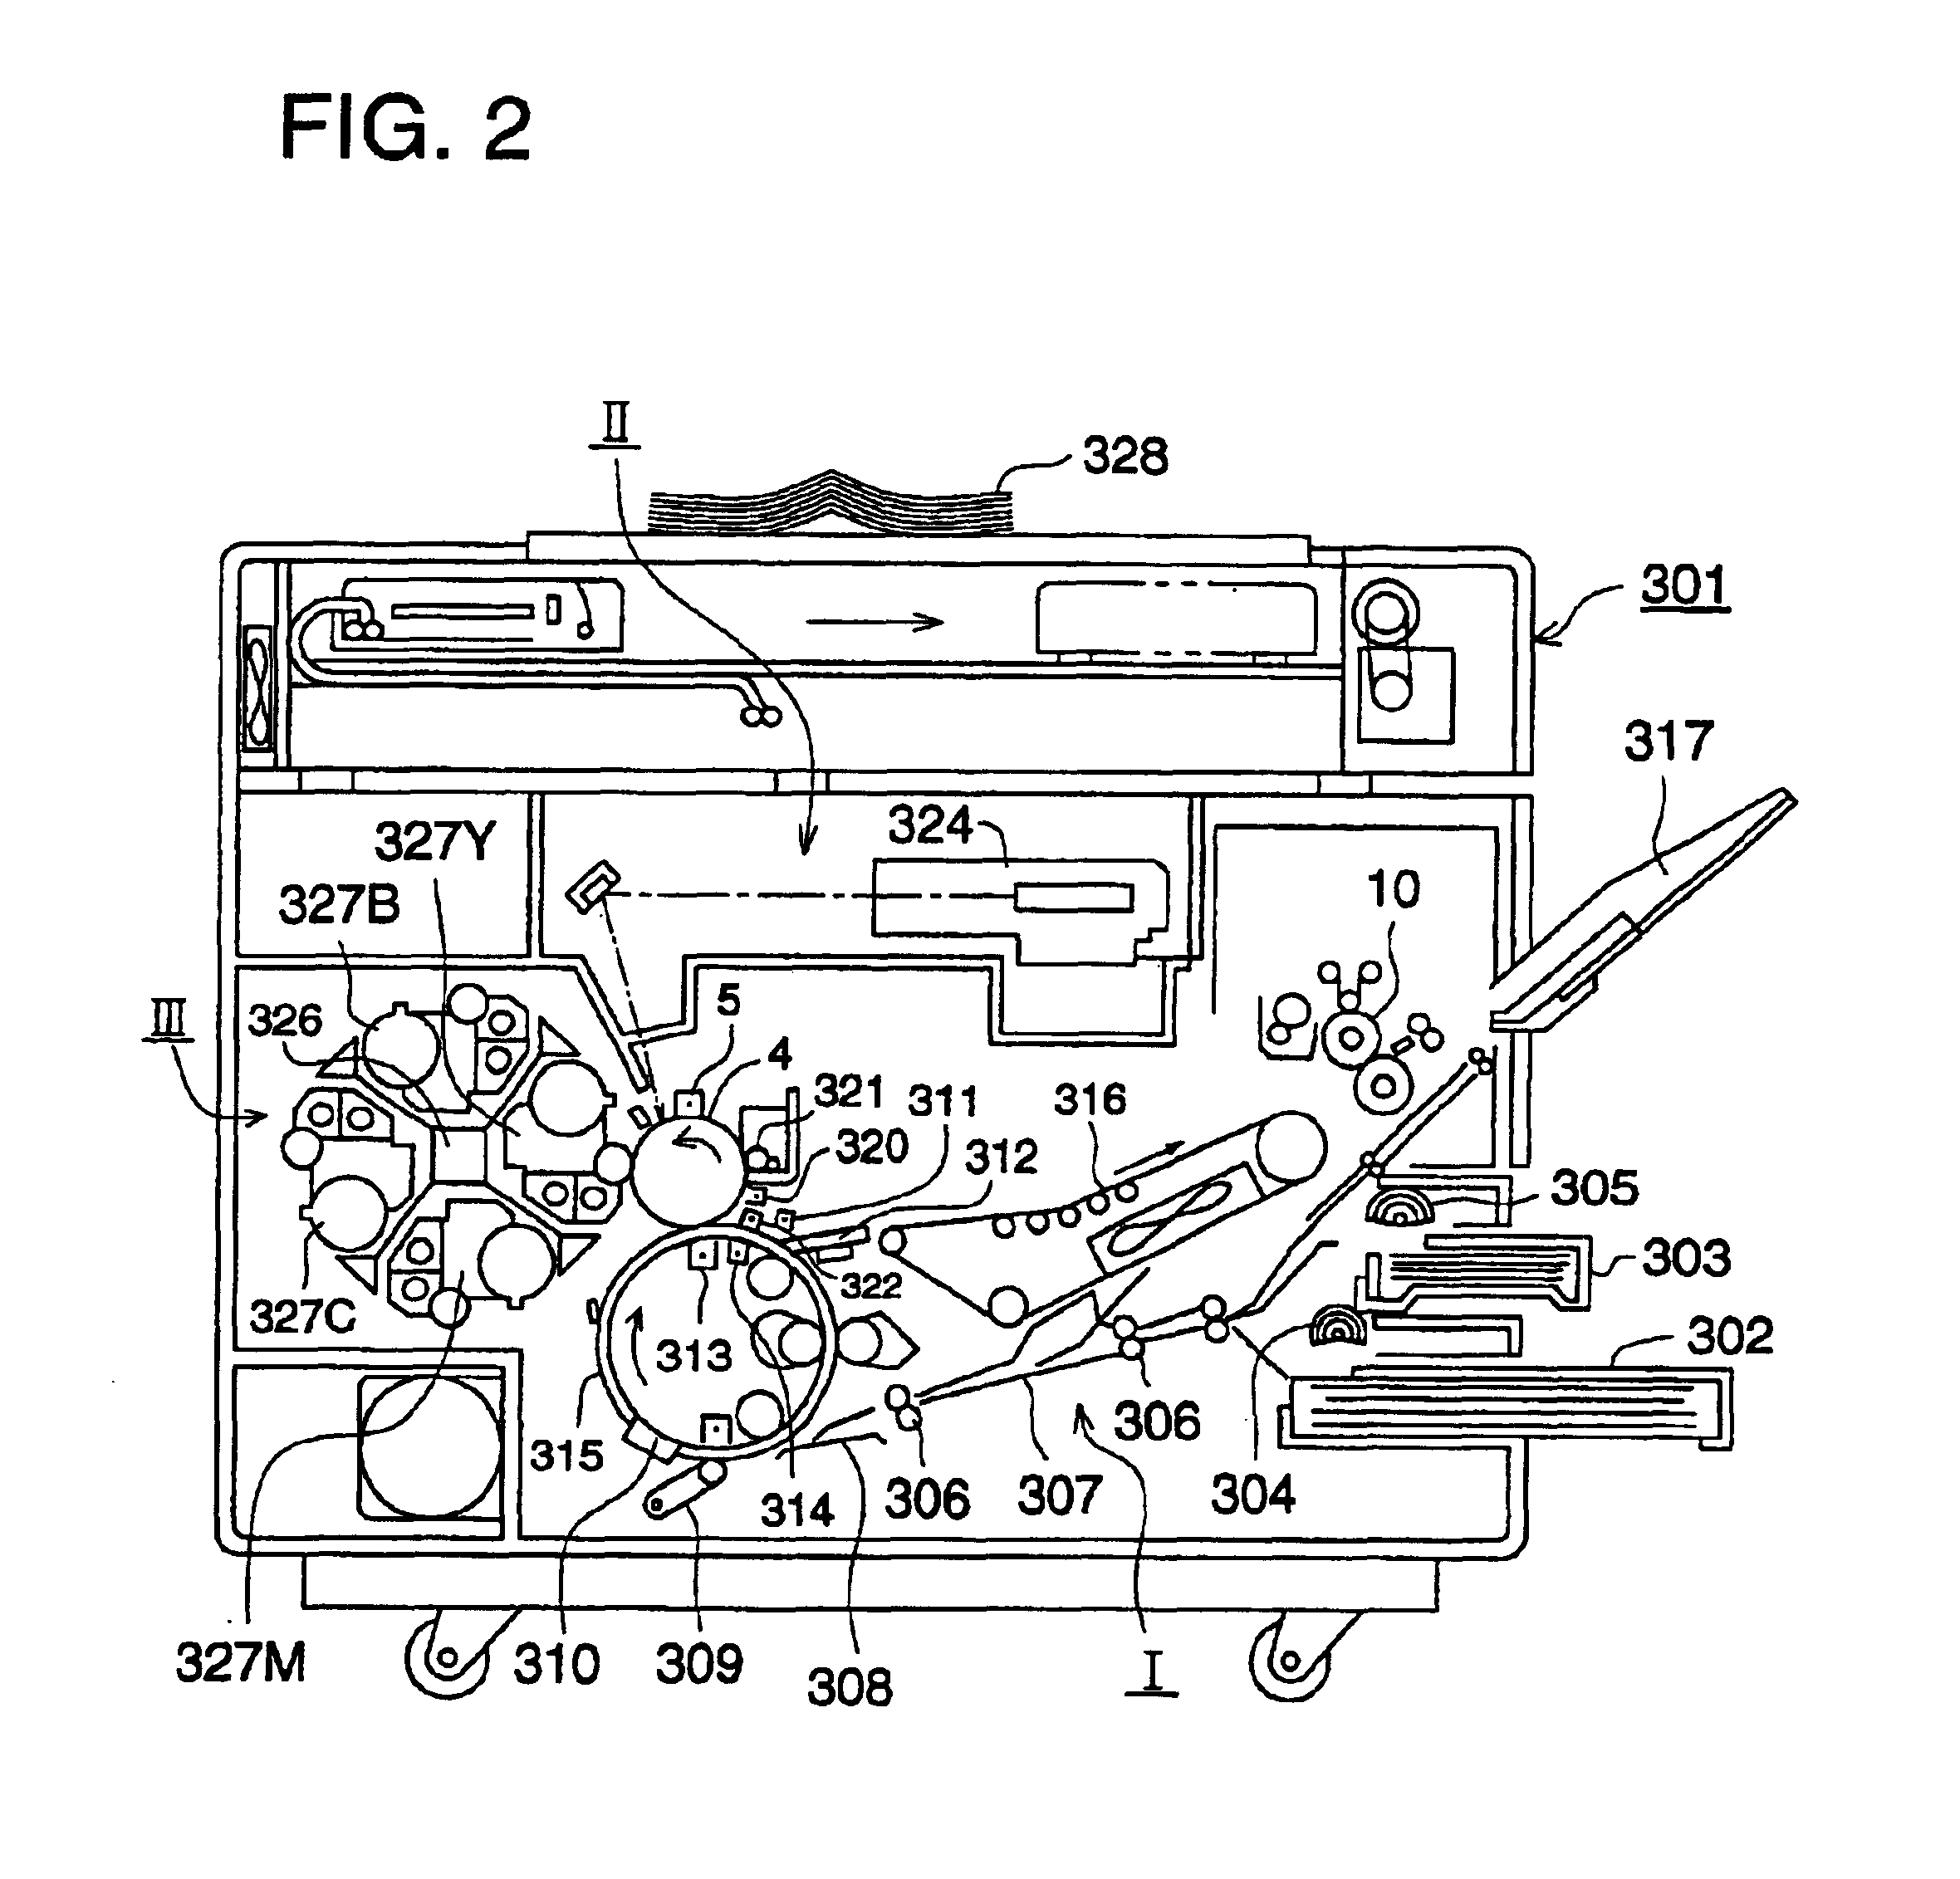 Image forming method and image forming apparatus